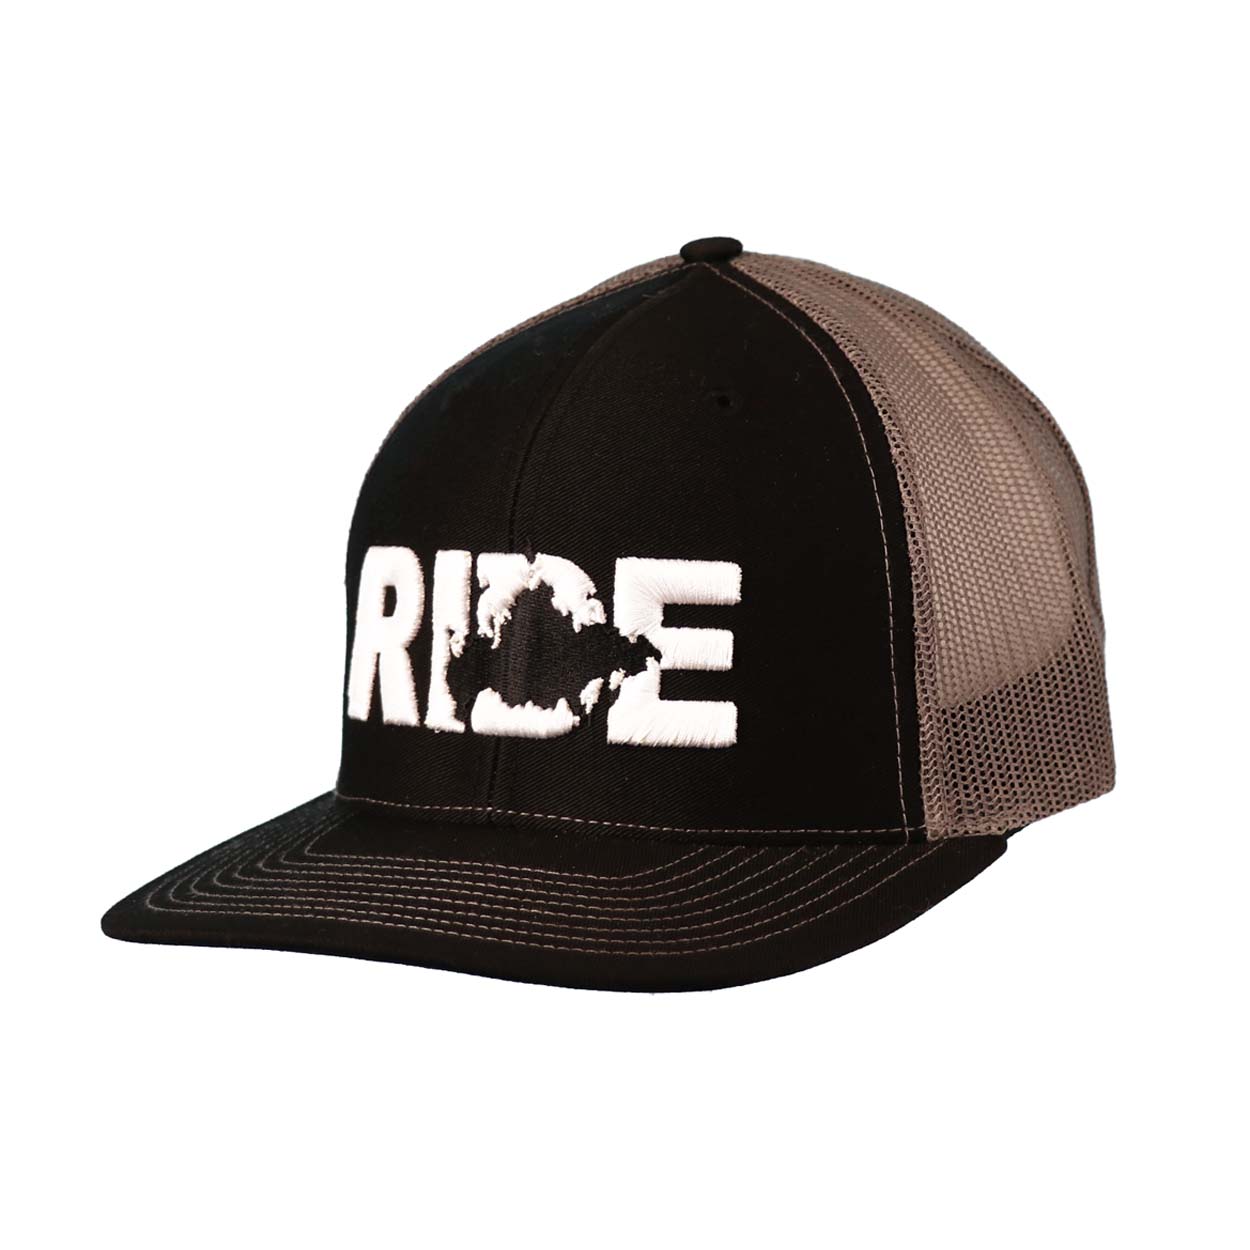 Ride Russia Classic Pro 3D Puff Embroidered Snapback Trucker Hat Black/Gray